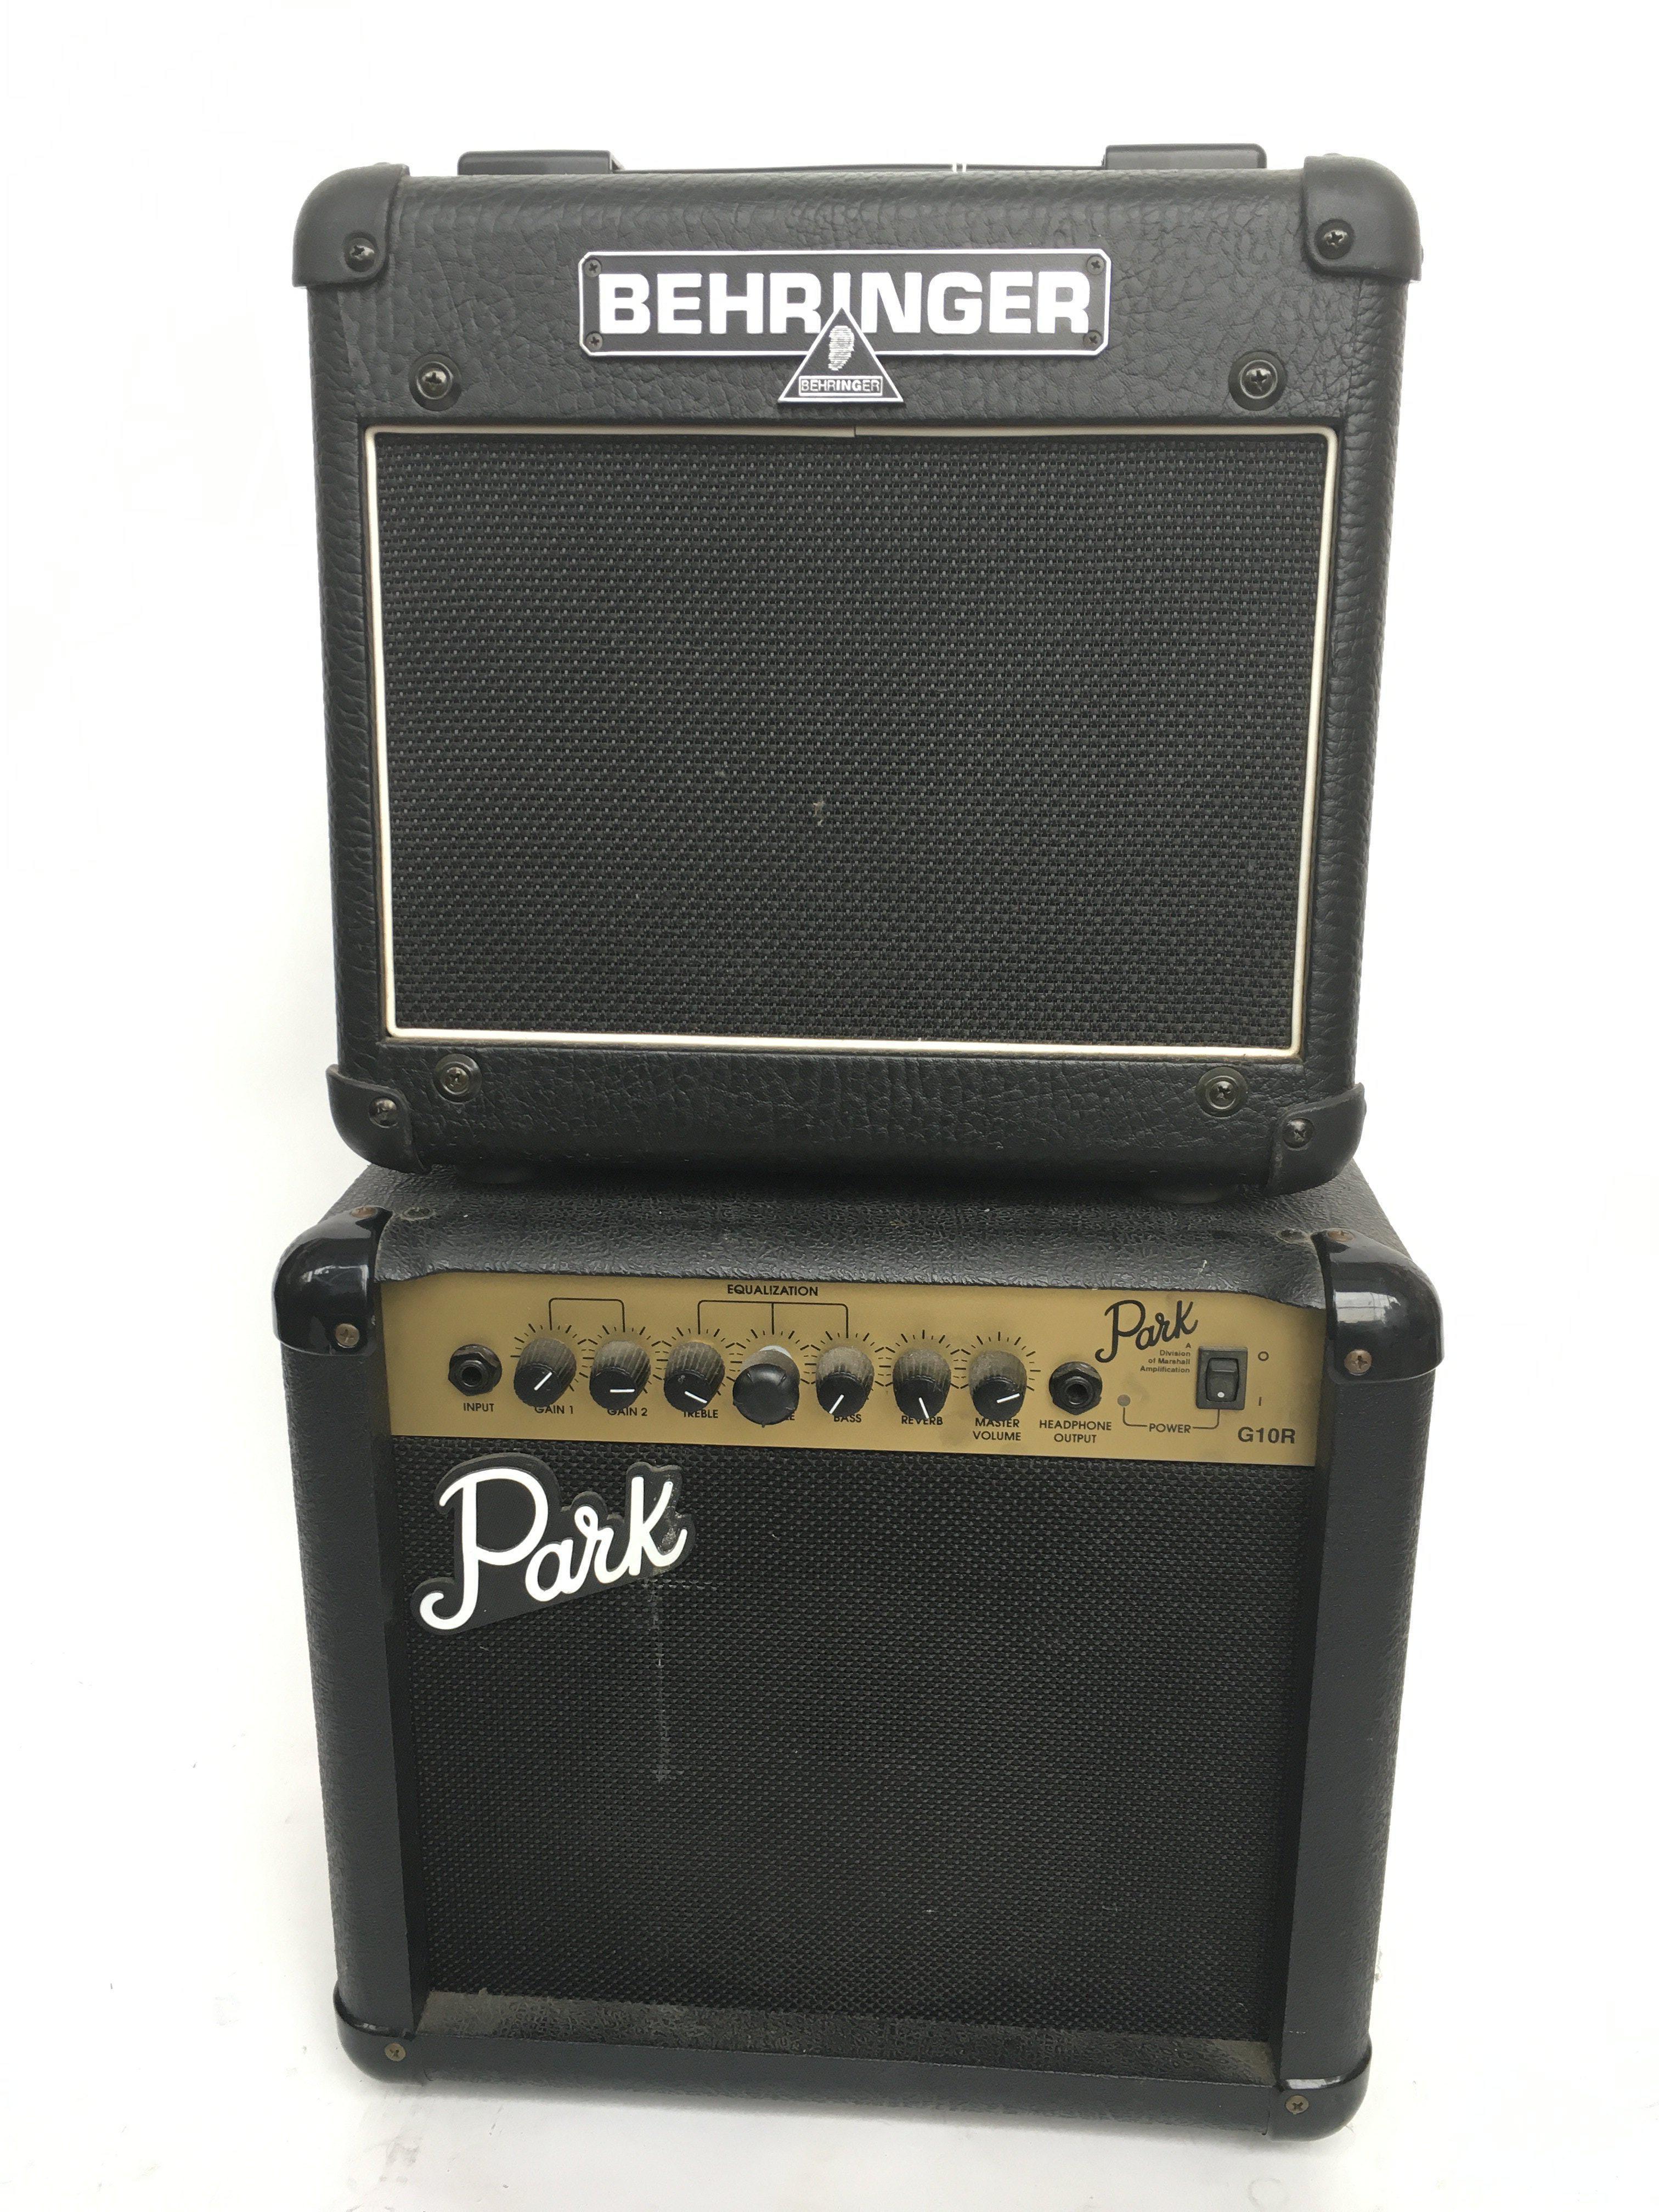 A Behringer 15W tube amplifier and a Park G10R gui